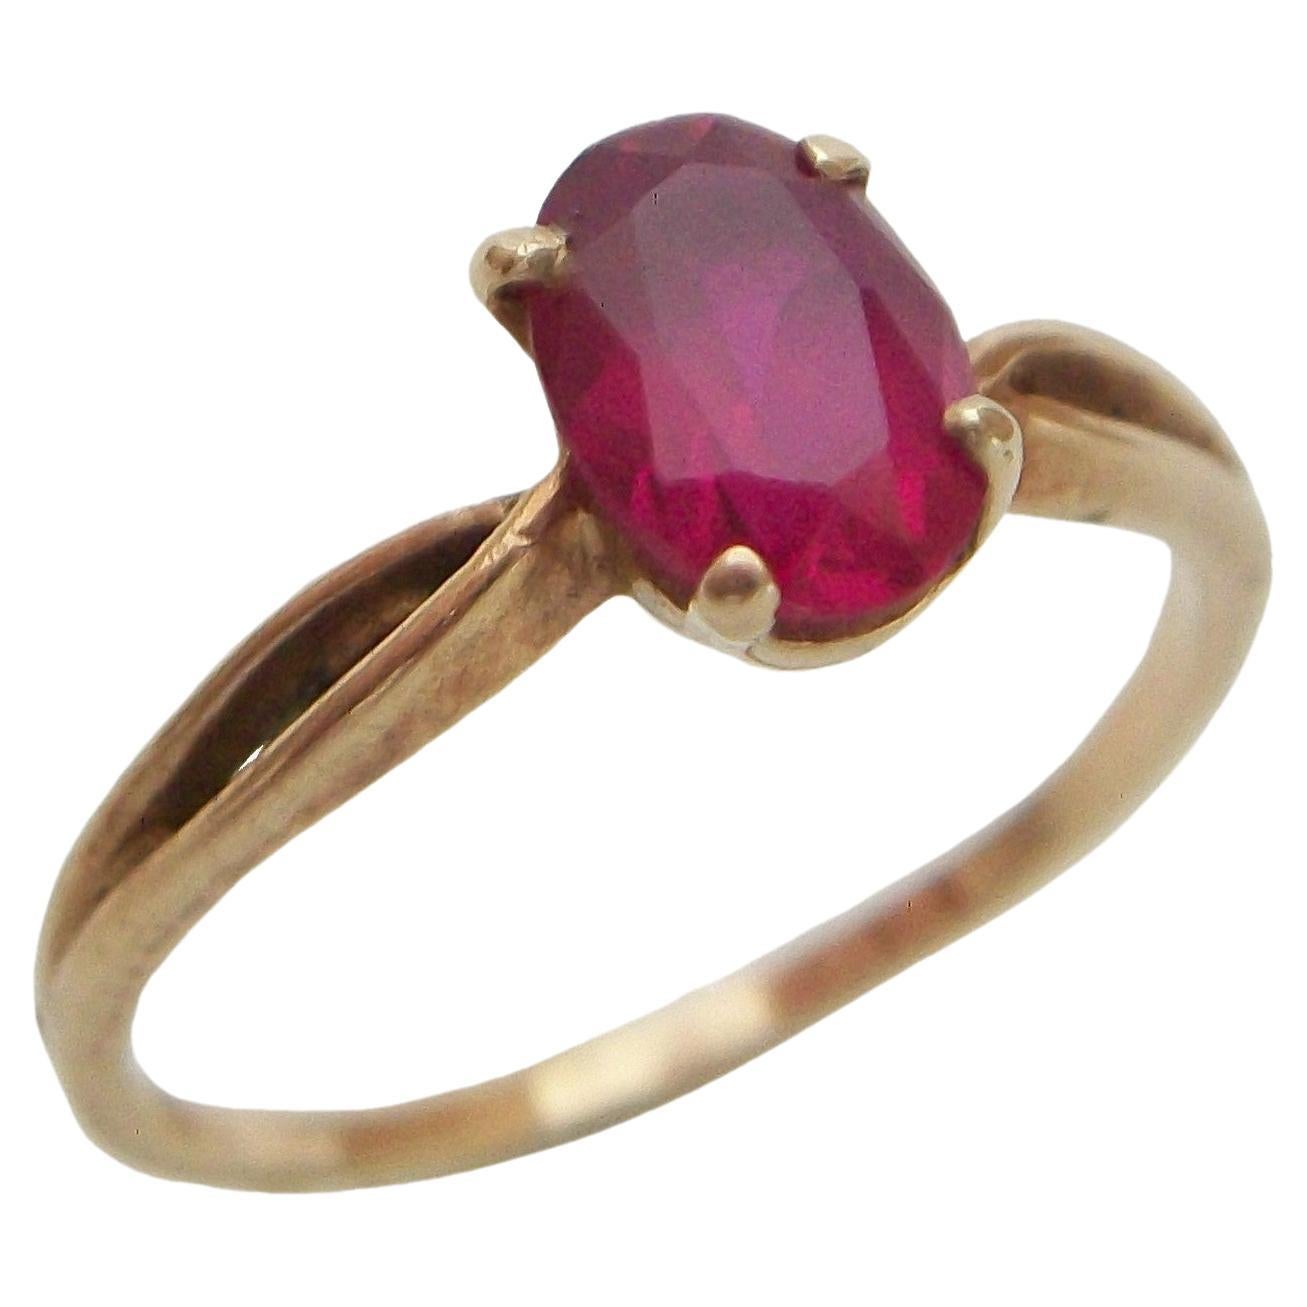 Vintage Red Topaz & 10K Yellow Gold Ring - Size 5.5 - U.S.A. - Circa 1980's